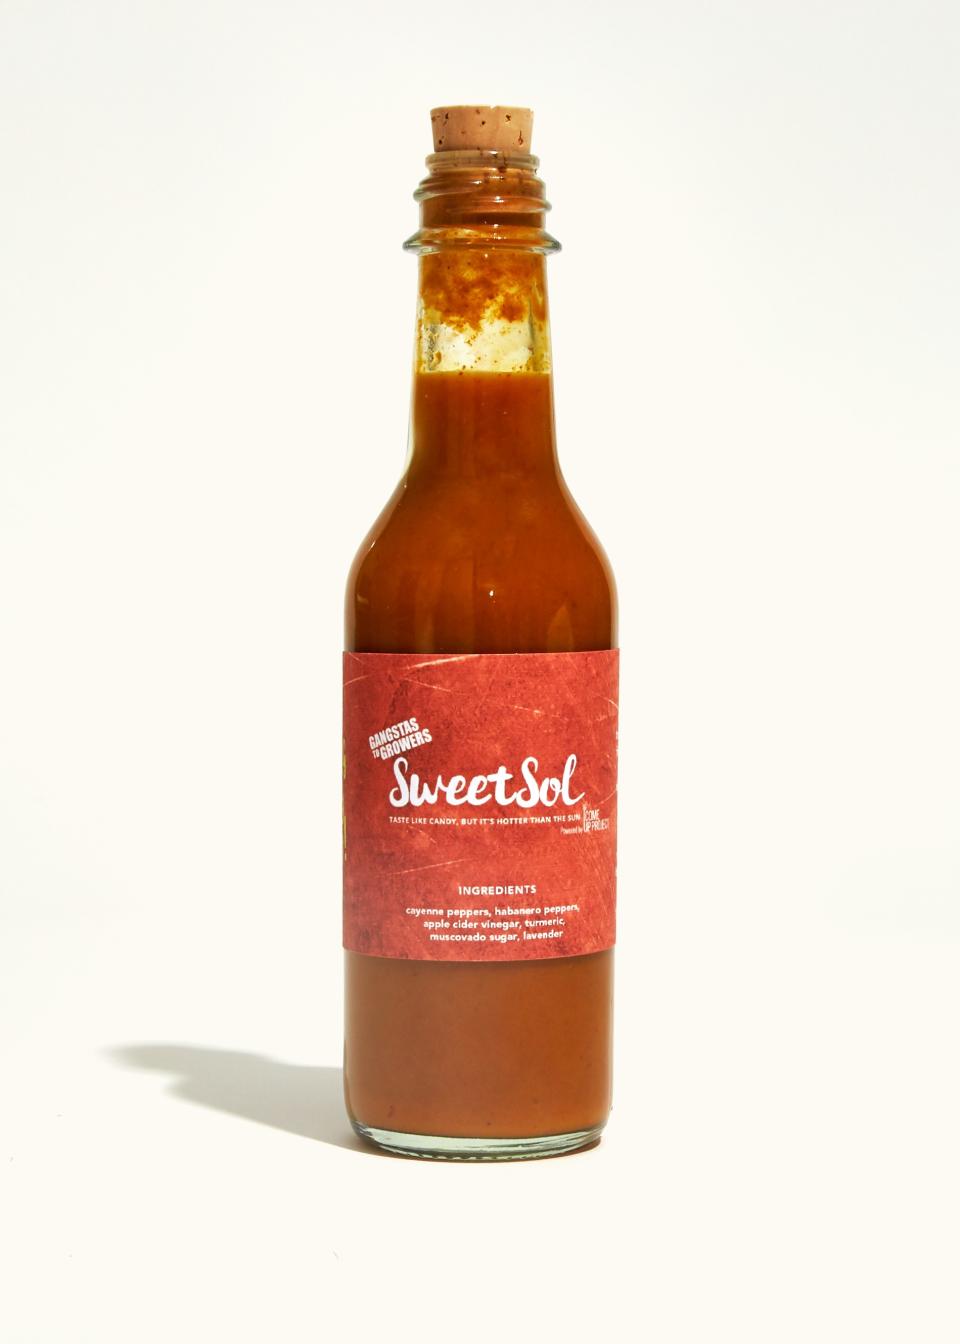 The Atlanta-based company makes tropical, pungent hot sauce that aims to reduce recidivism in formerly incarcerated youth.